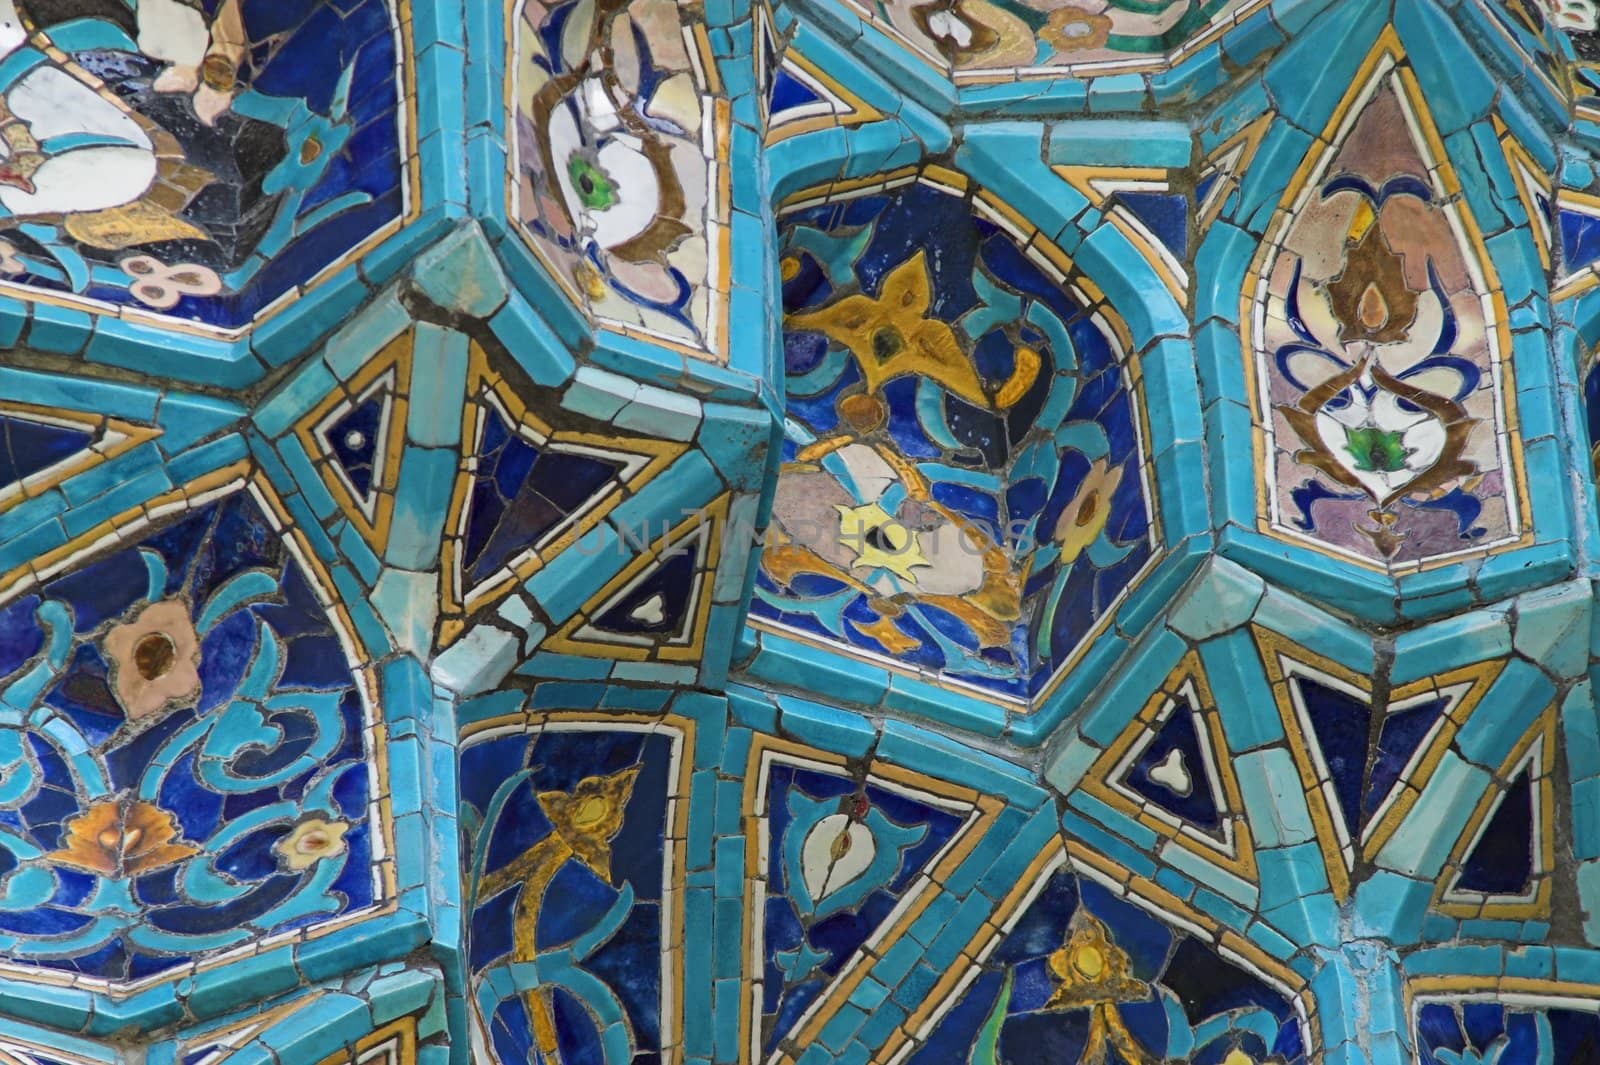 Fragment of a tiled wall  by simfan